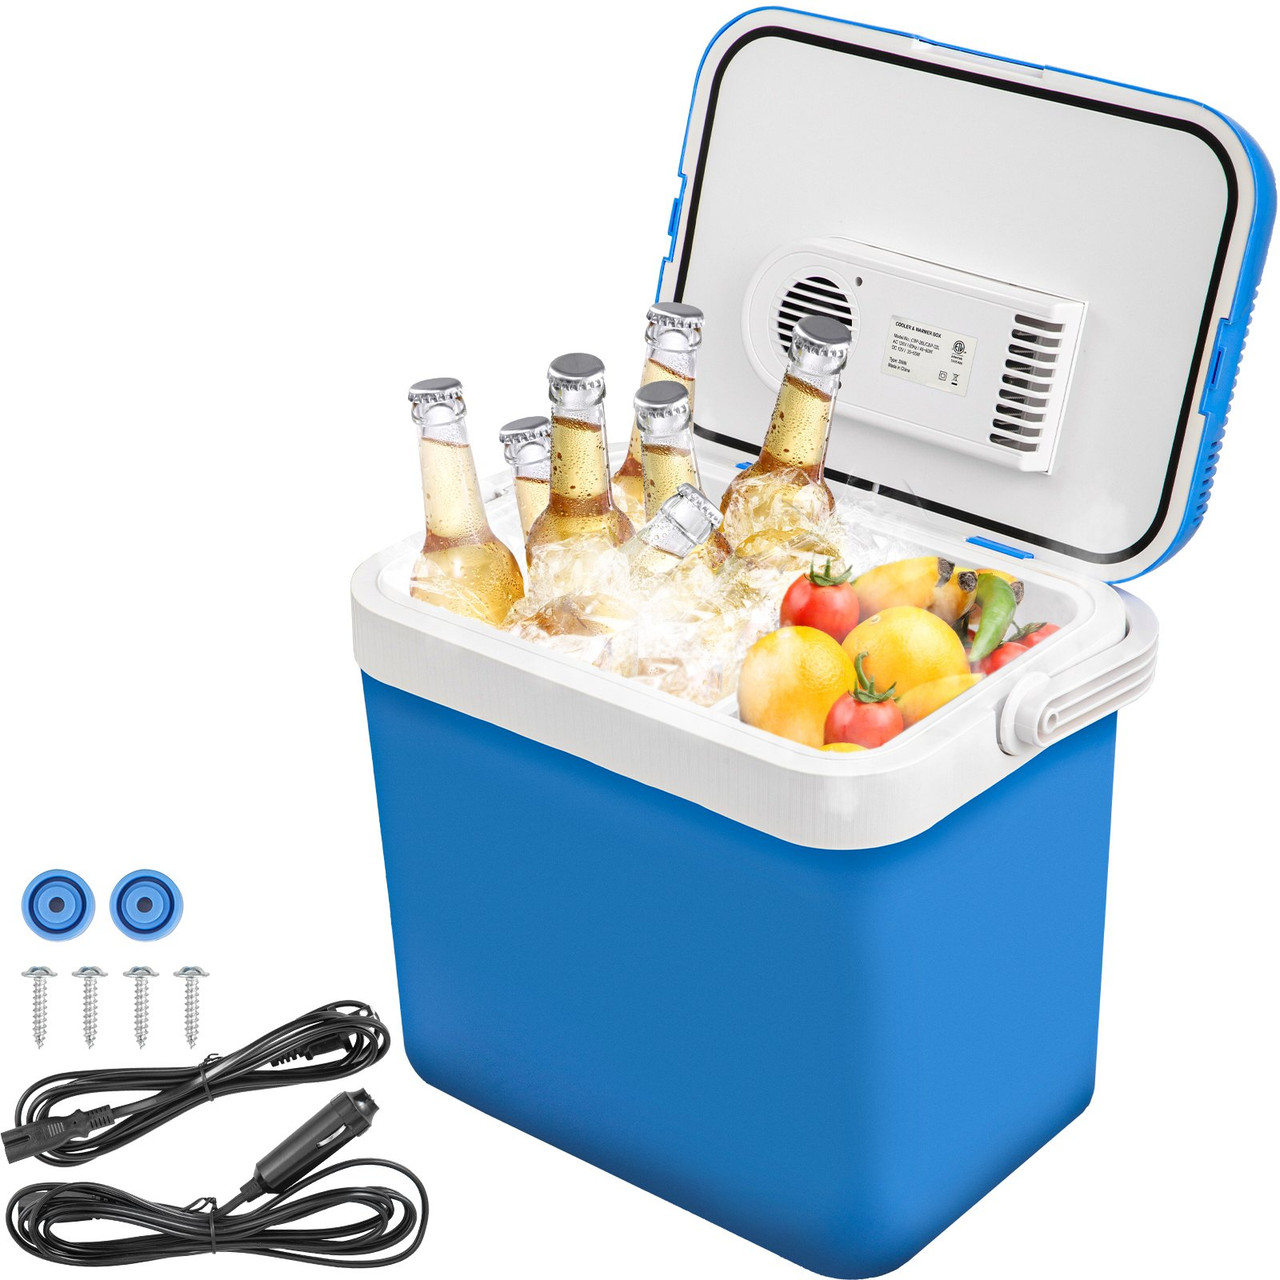 Electric Cooler and Warmer, 34 Quart Portable Thermoelectric Fridge, Plug  in Refrigerator with Collapsible Handle, 110V